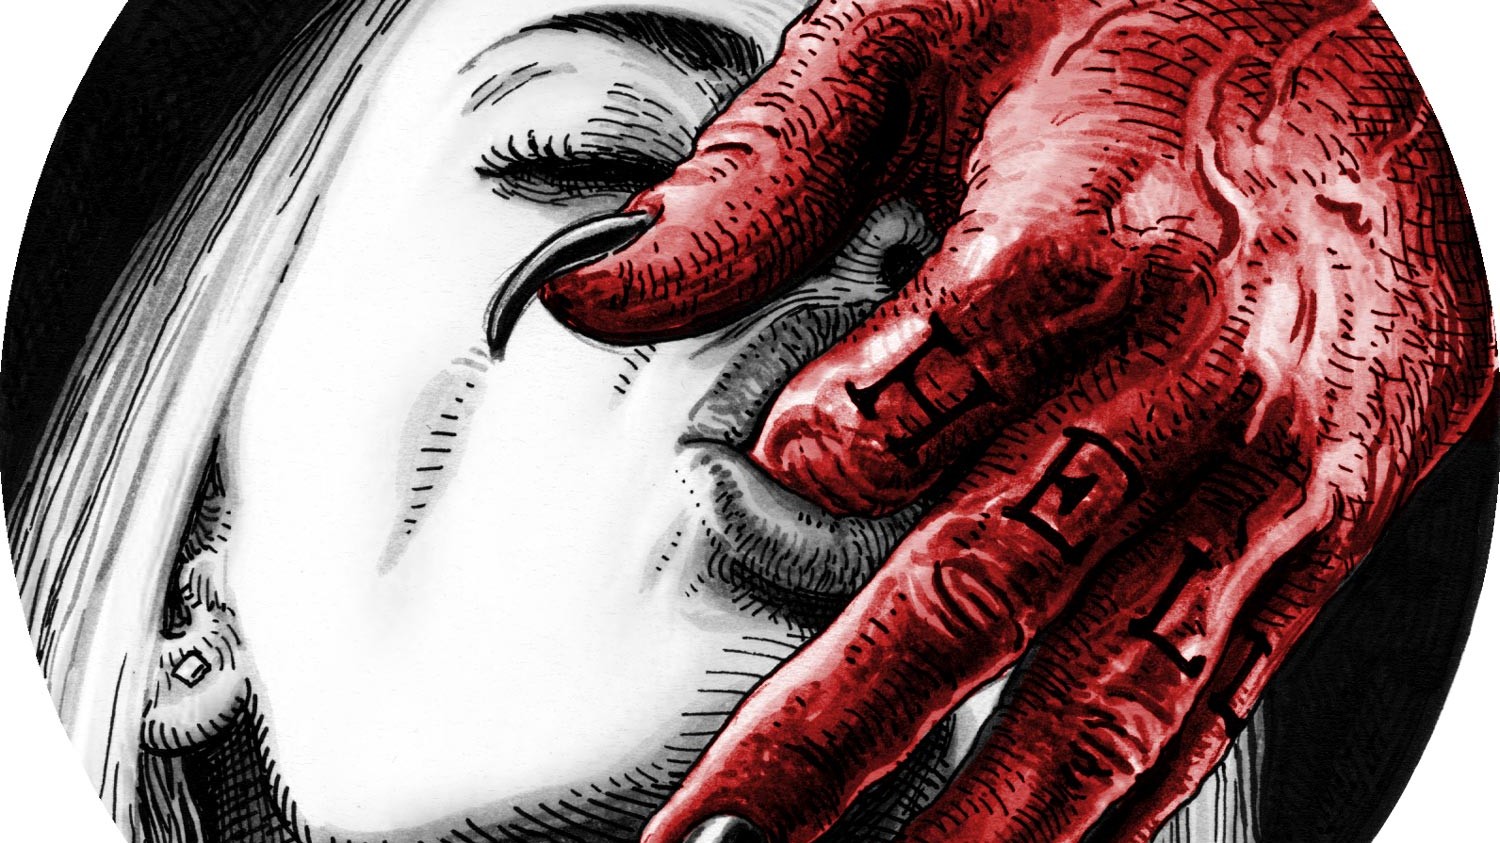 NSFW] These Devilish Illustrations Are Sinfully Sexy